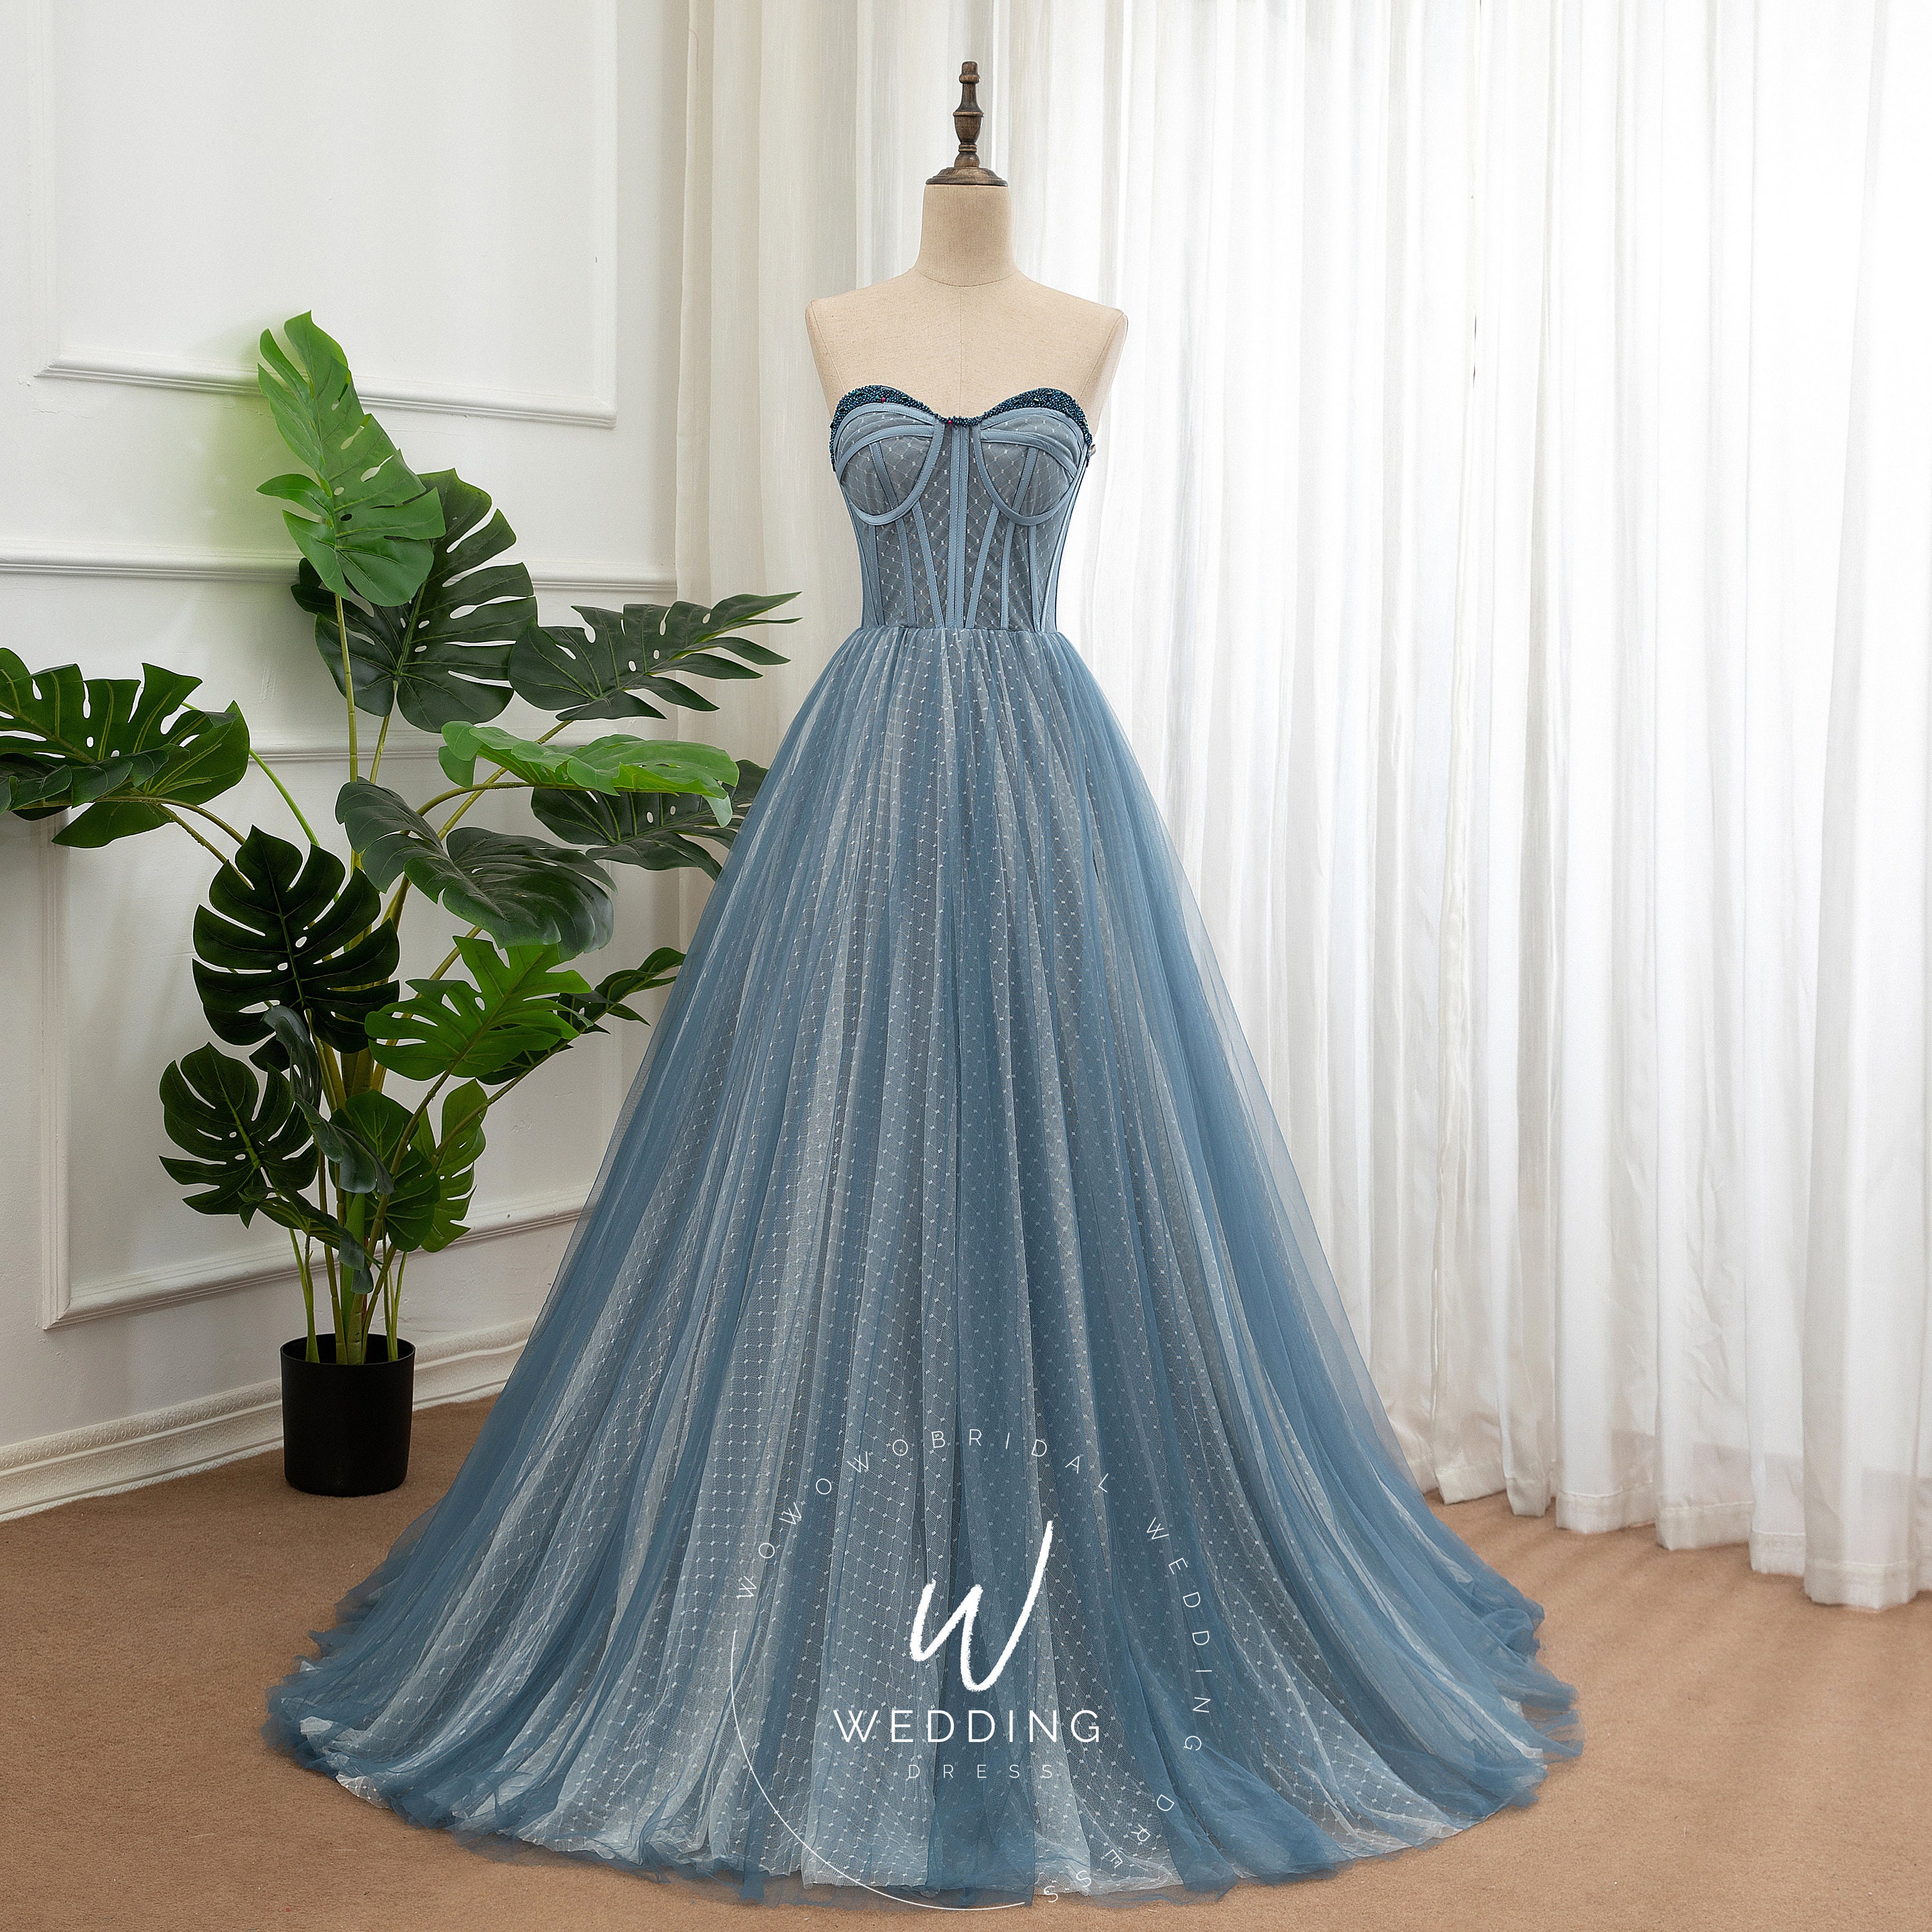 Blue Prom Ball Gown, Strapless Party Dress, Fairy Graduation Dress